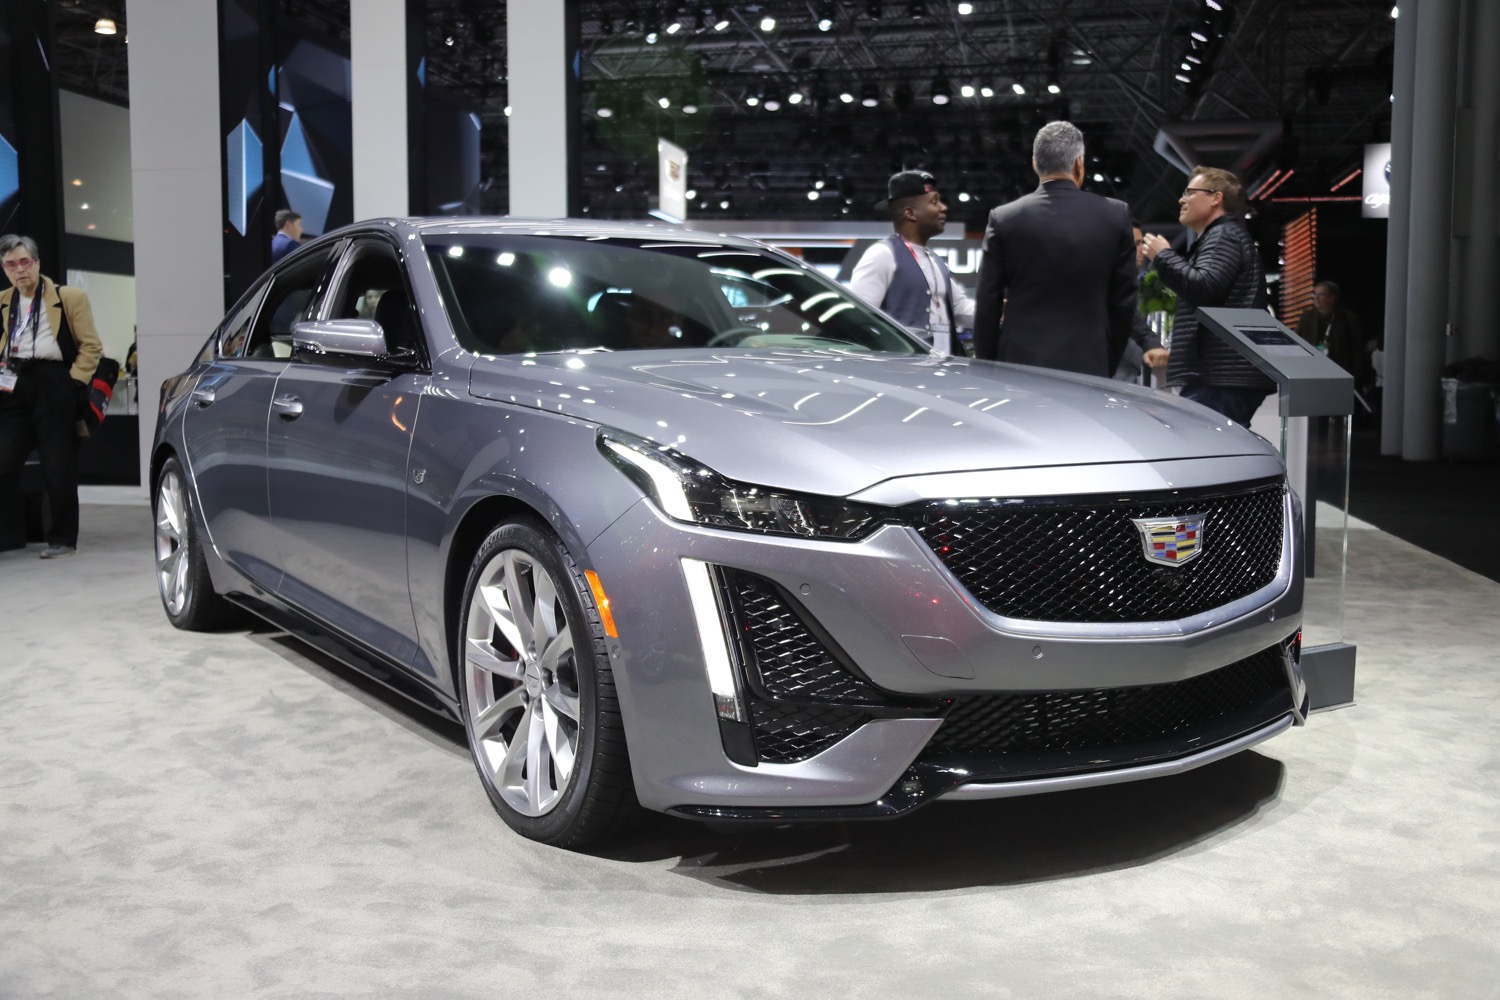 The Cadillac Cts Sedan Officially Discontinued